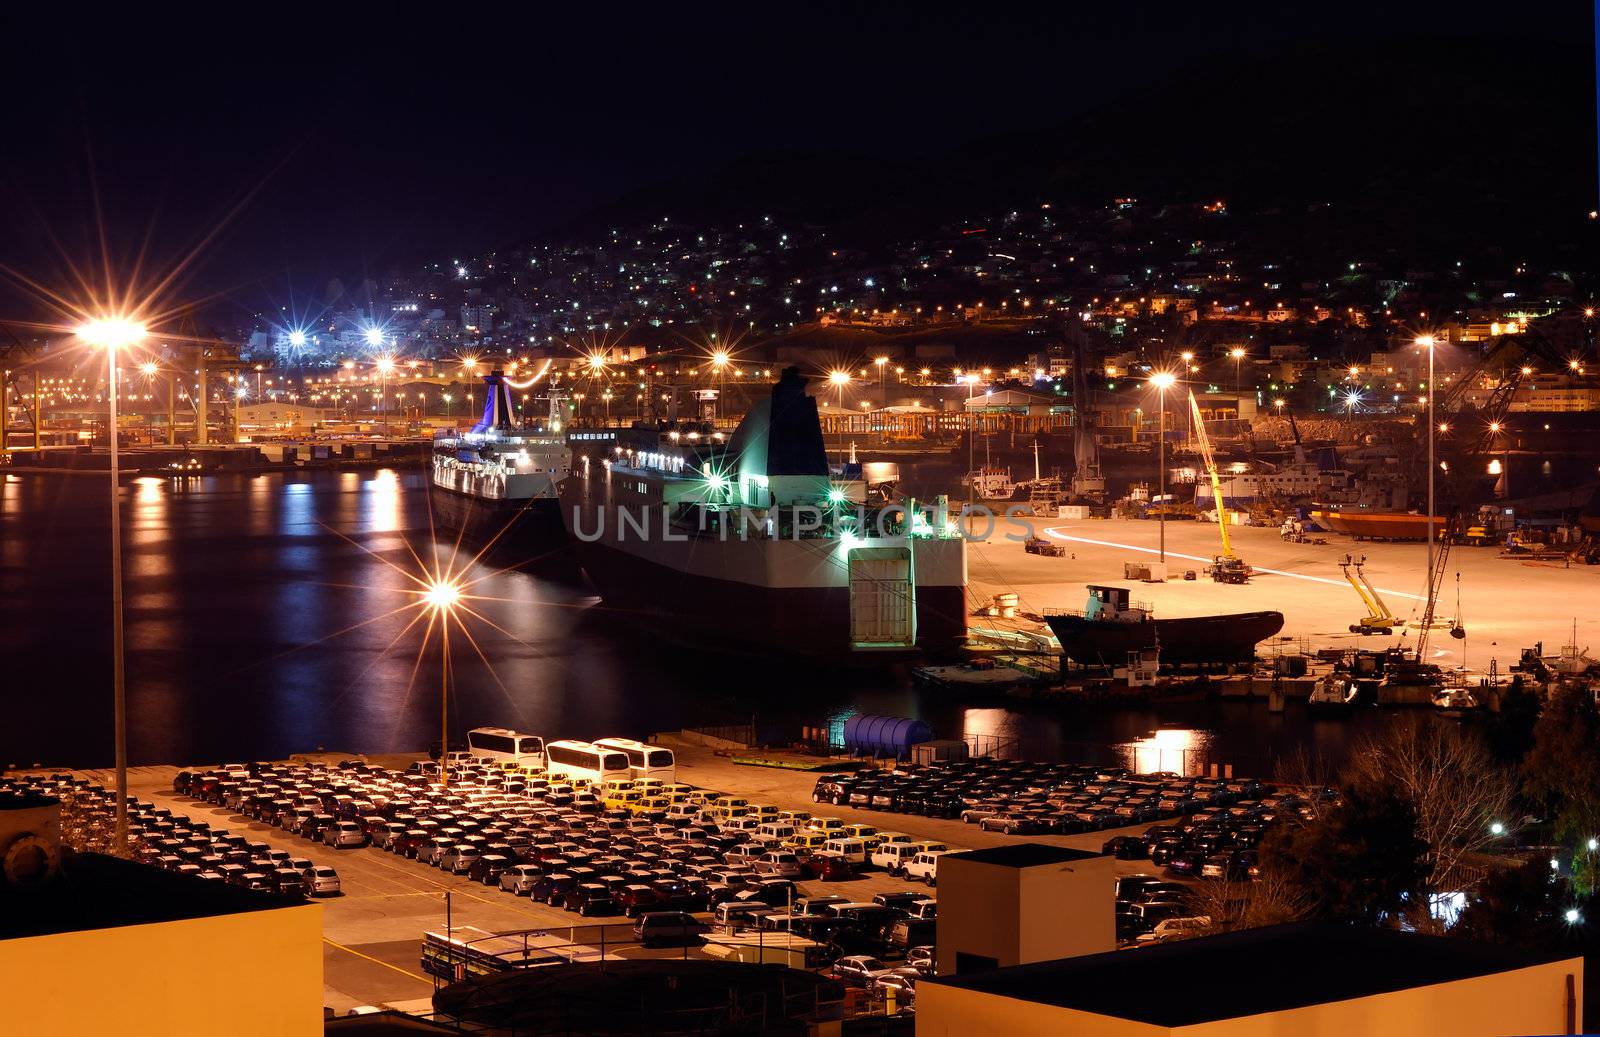 Image shows a part of the port of Piraeus, in Greece, captured at night